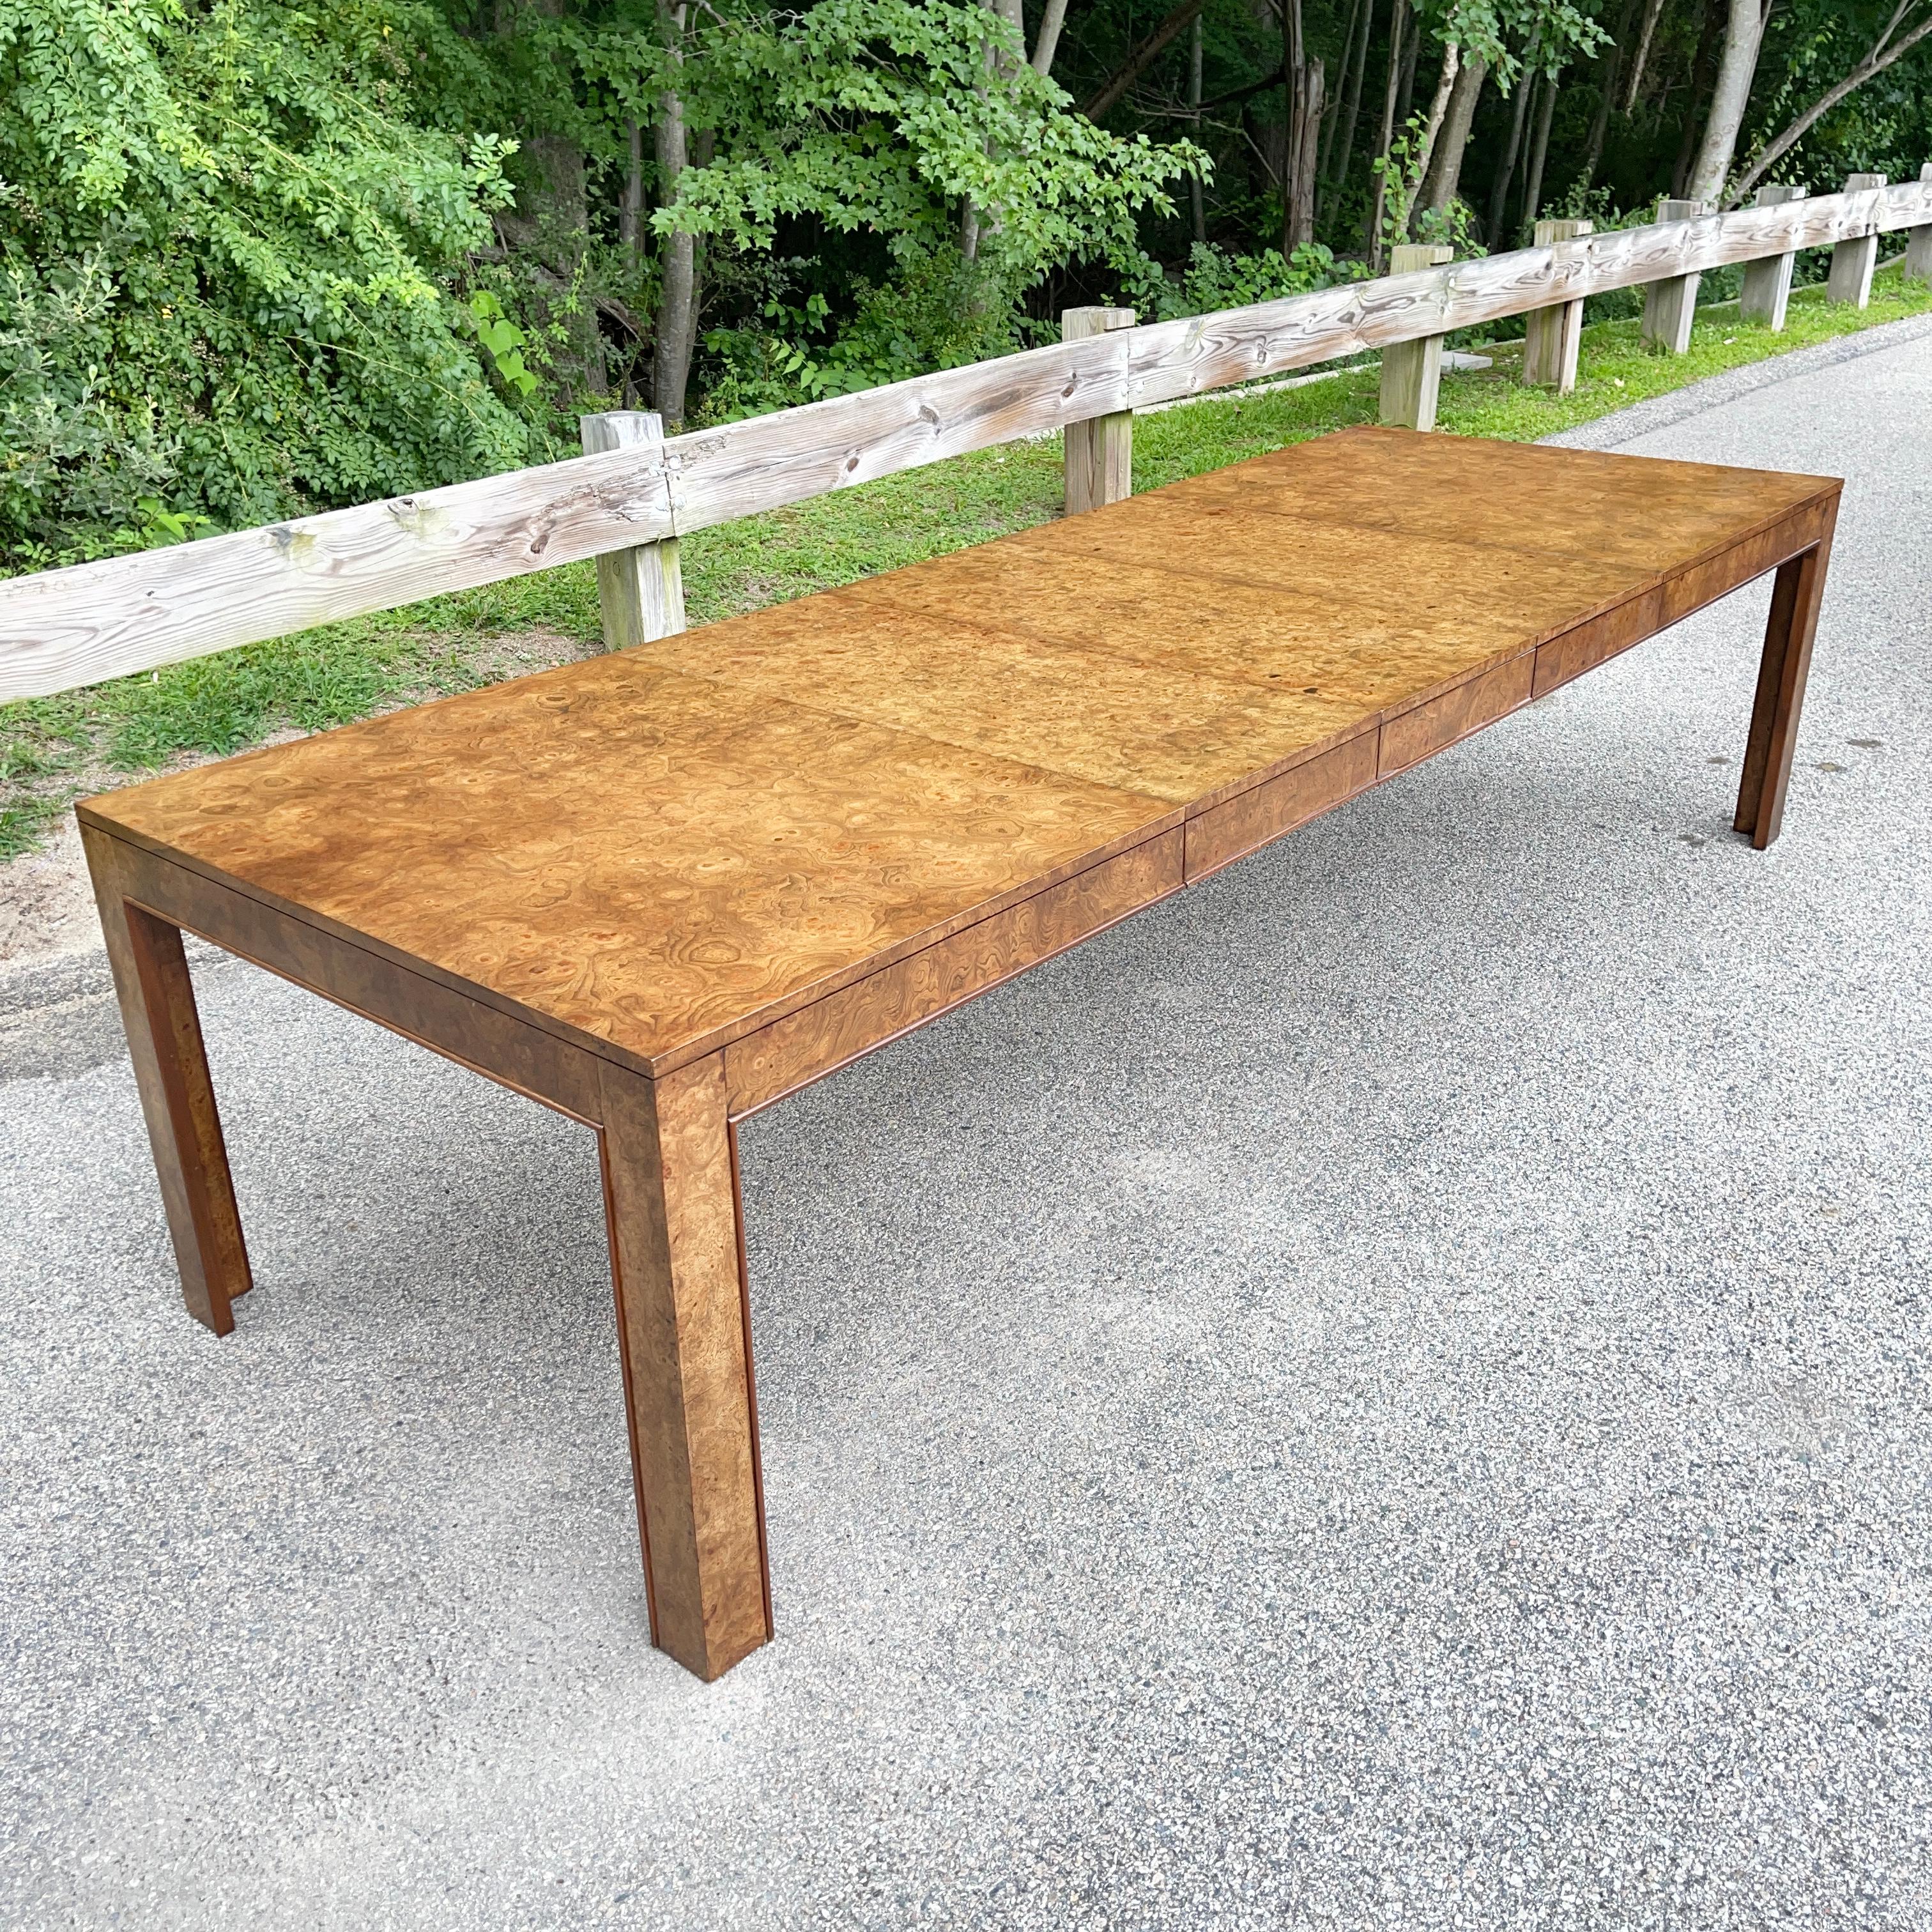 1970's expandable parsons form dining table from John Widdicomb/John Stuart in highly figural olive ash burl. Restored by our expert refinisher.
Dimensions: 30 in high x 42 in wide x 68 in long when closed.
Expandable up to 122 in long with all